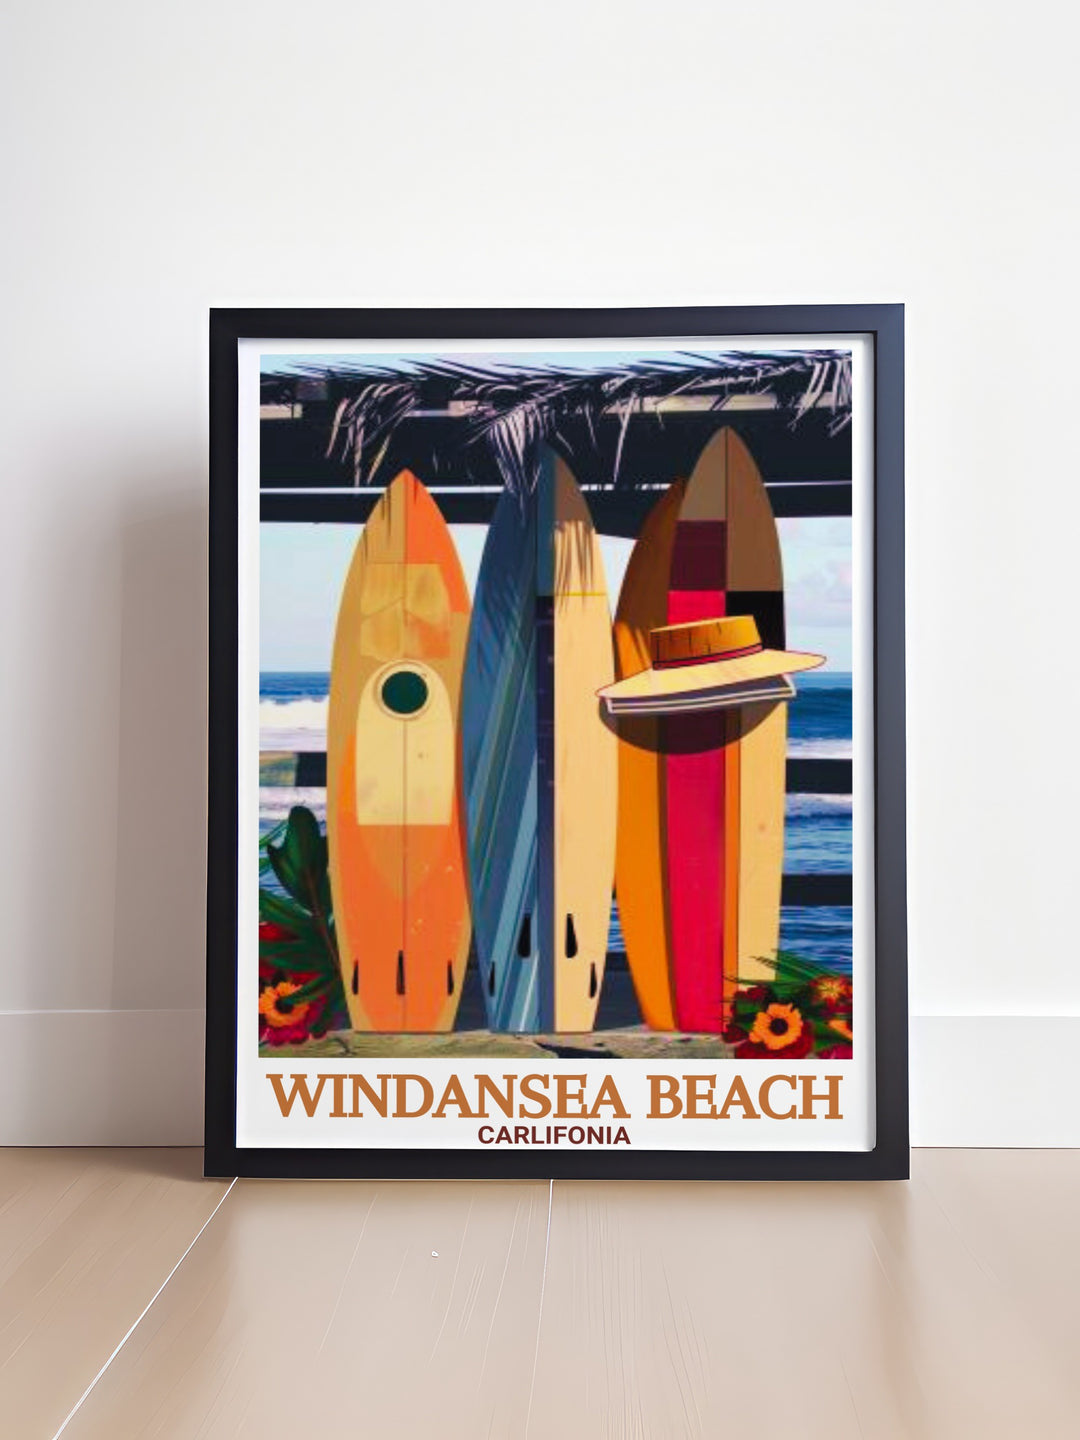 Elegant Windansea Beach Shack Art print showcasing the natural beauty of San Diegos iconic beach shack perfect for any room. This vintage poster is a wonderful addition to wall art and makes an excellent personalized gift.